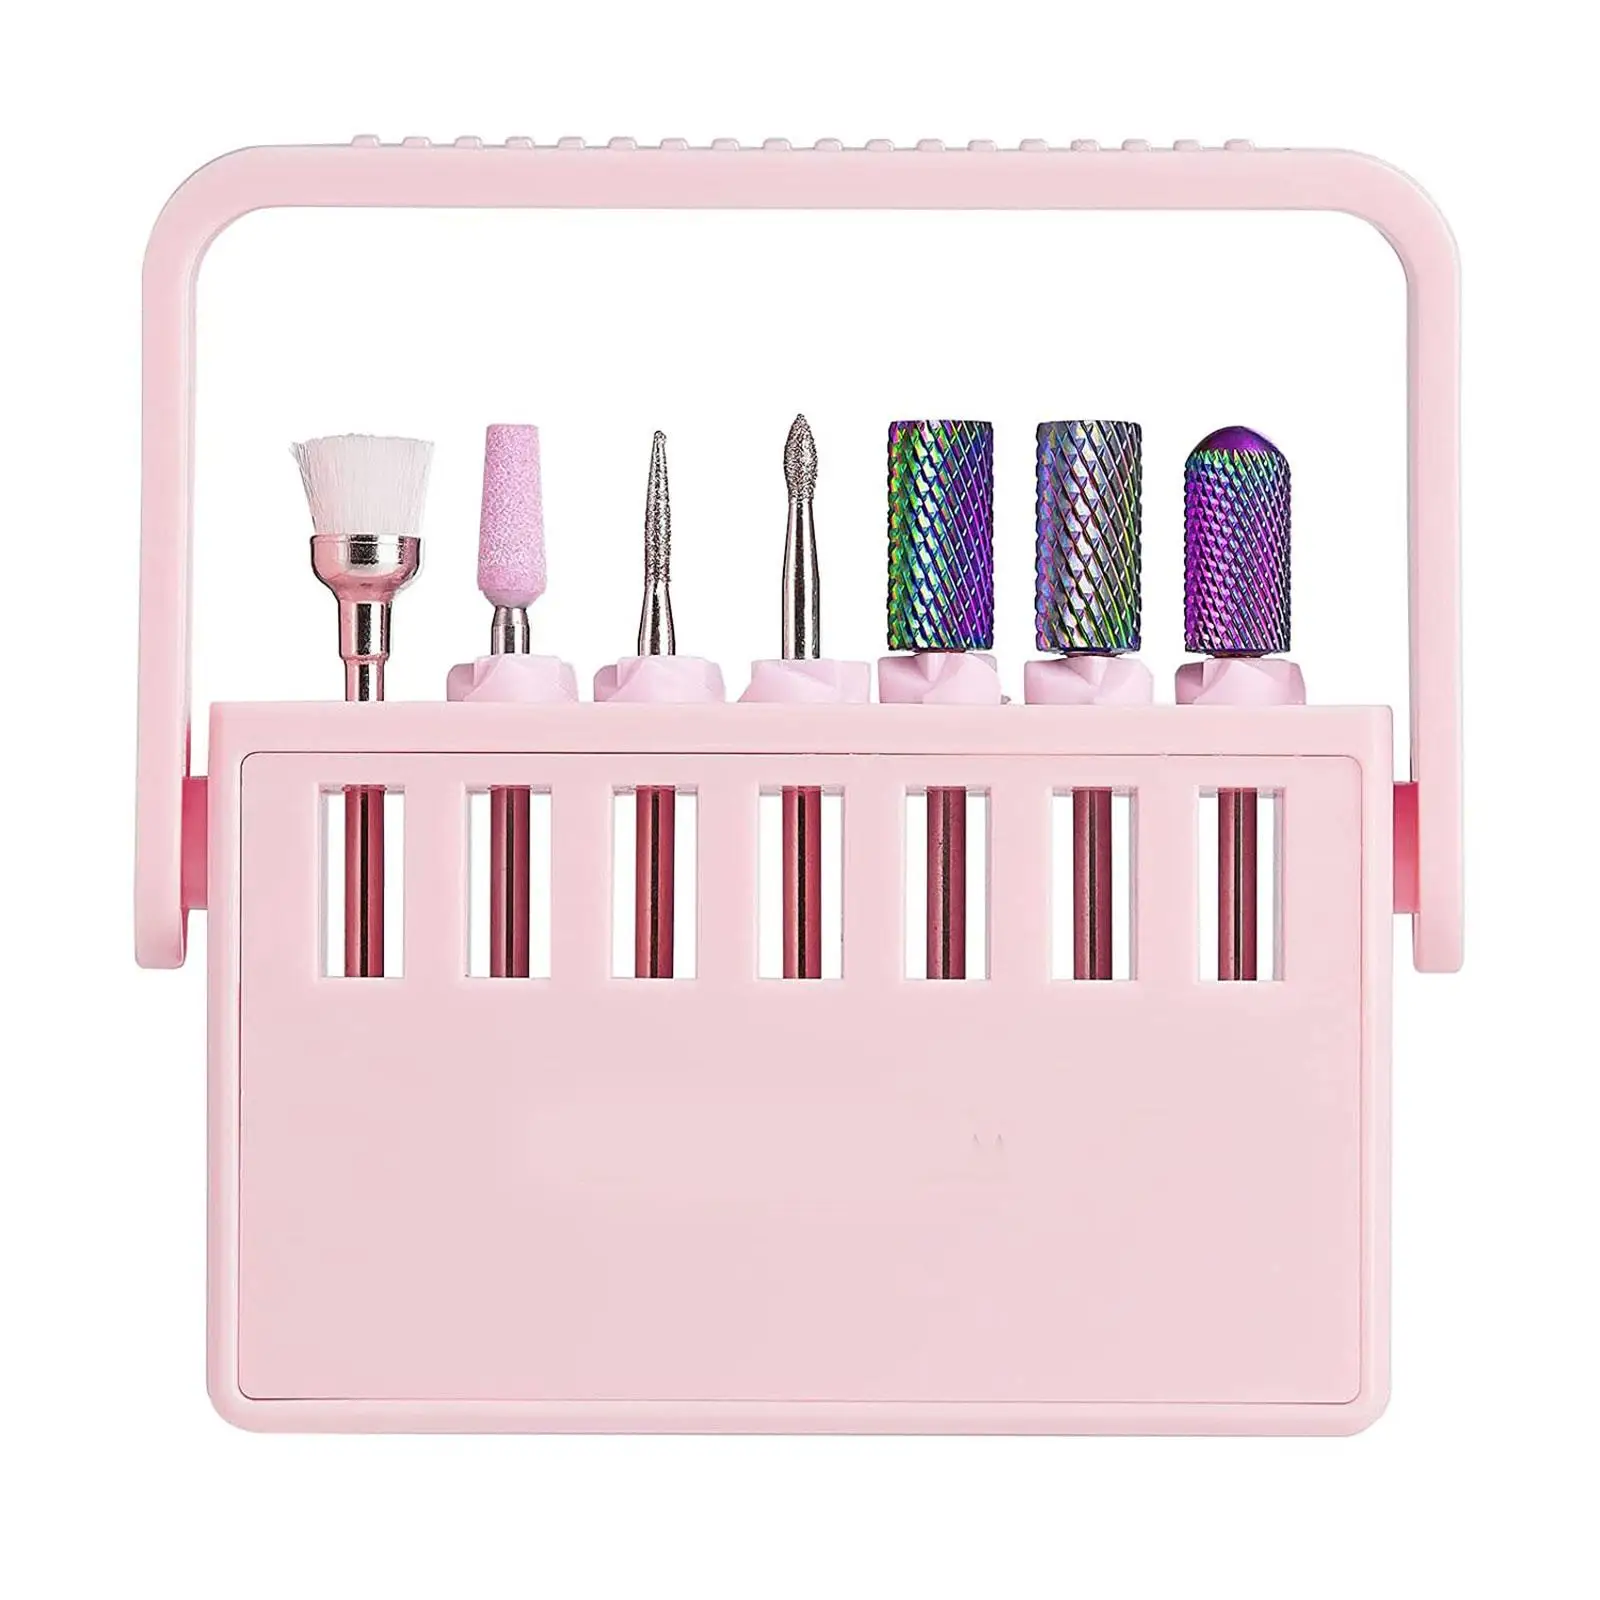 Nail Drill Bits Holder Adjustable Stand Acrylic Nails Manicure Tool Small Nail Art Tool 7 Holes Storage Container for Salon Home